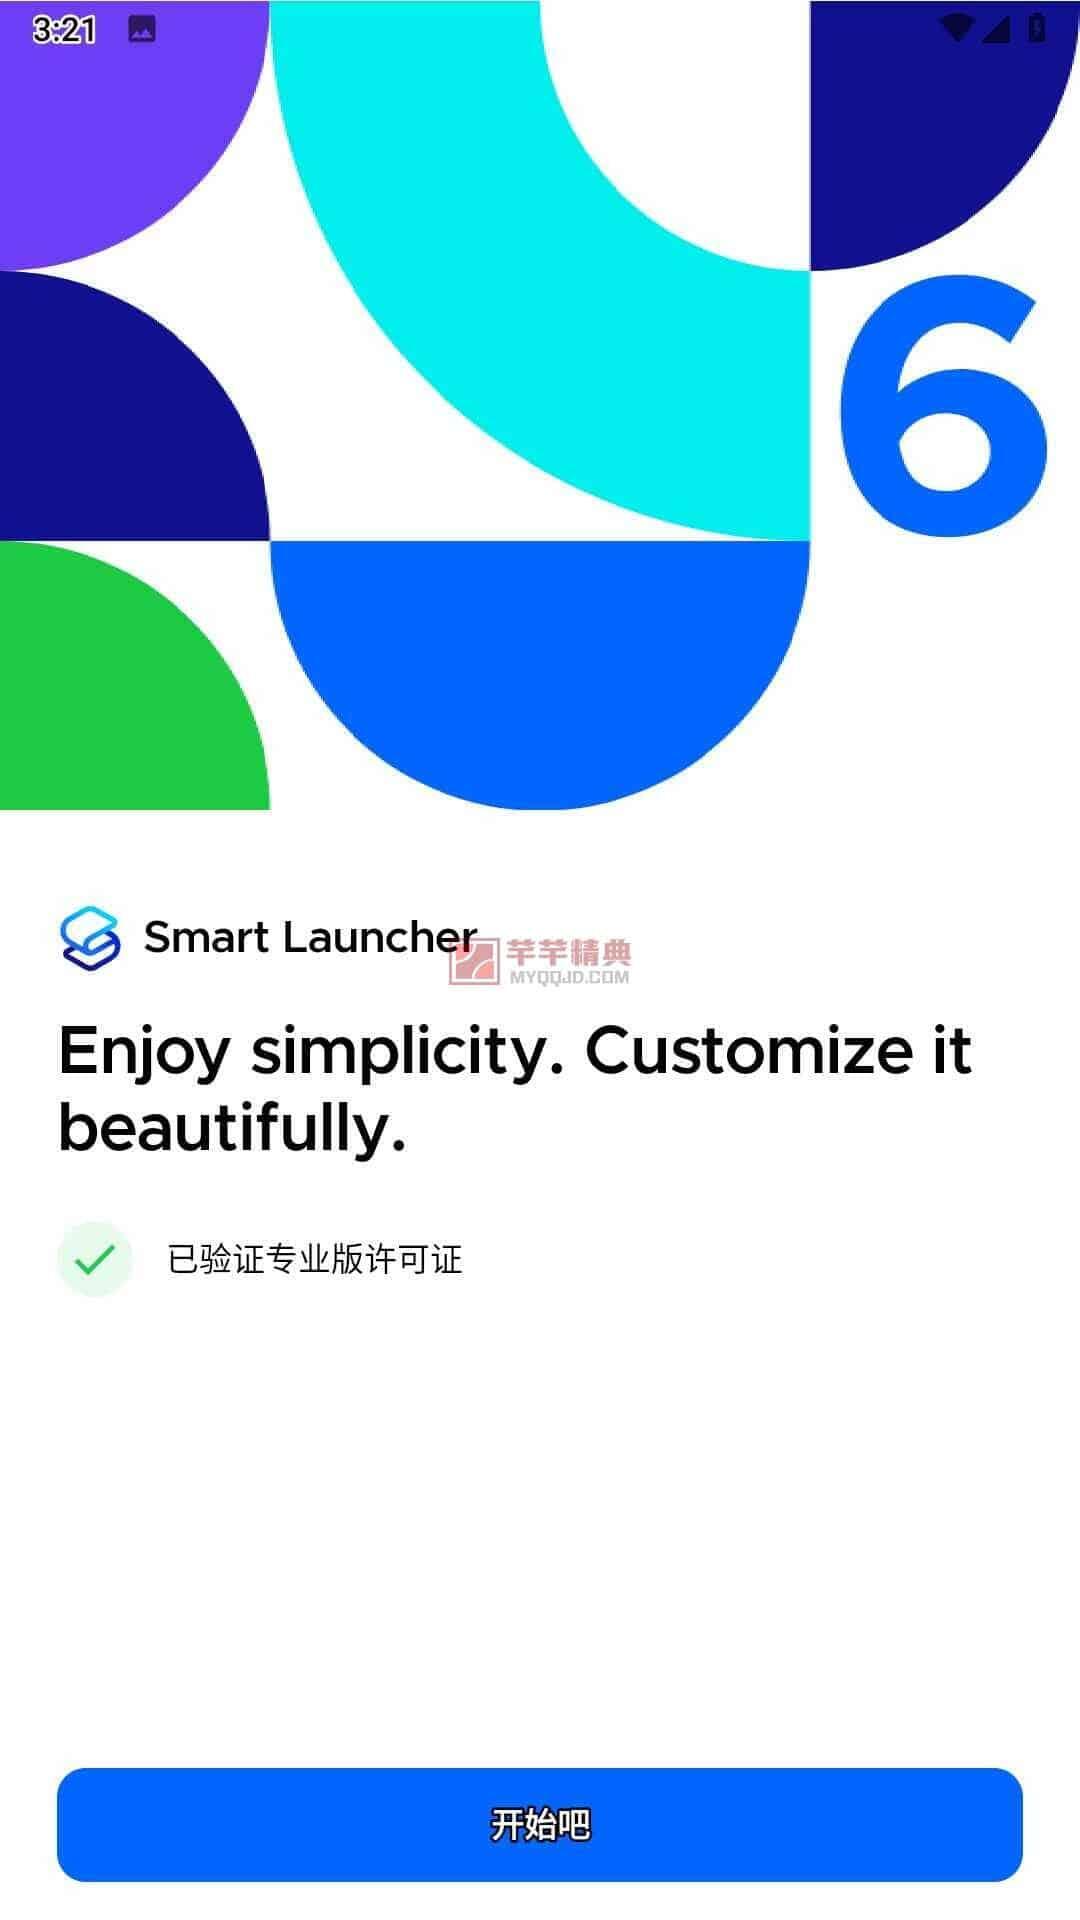 Smart Launcher Pro 6 v6.4 build 009 for Android付费高级版